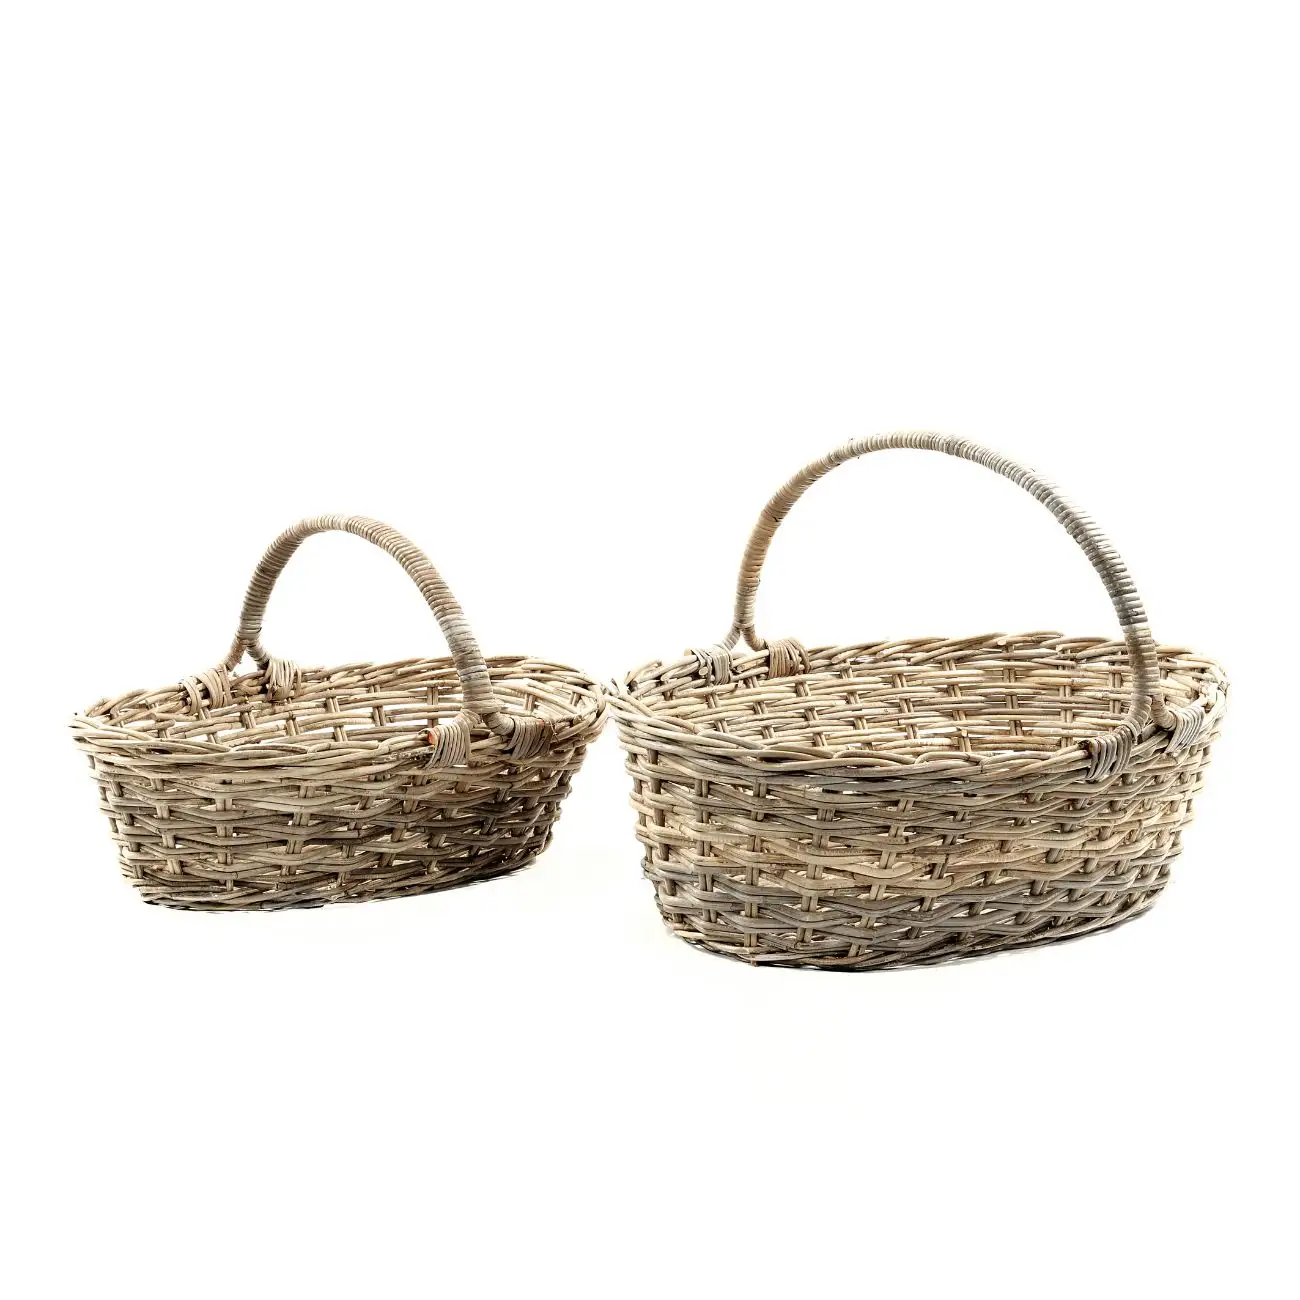 oval shaped fruit basket accessories storage made of rattan kubu grey weaving rattan with plastic lining inside